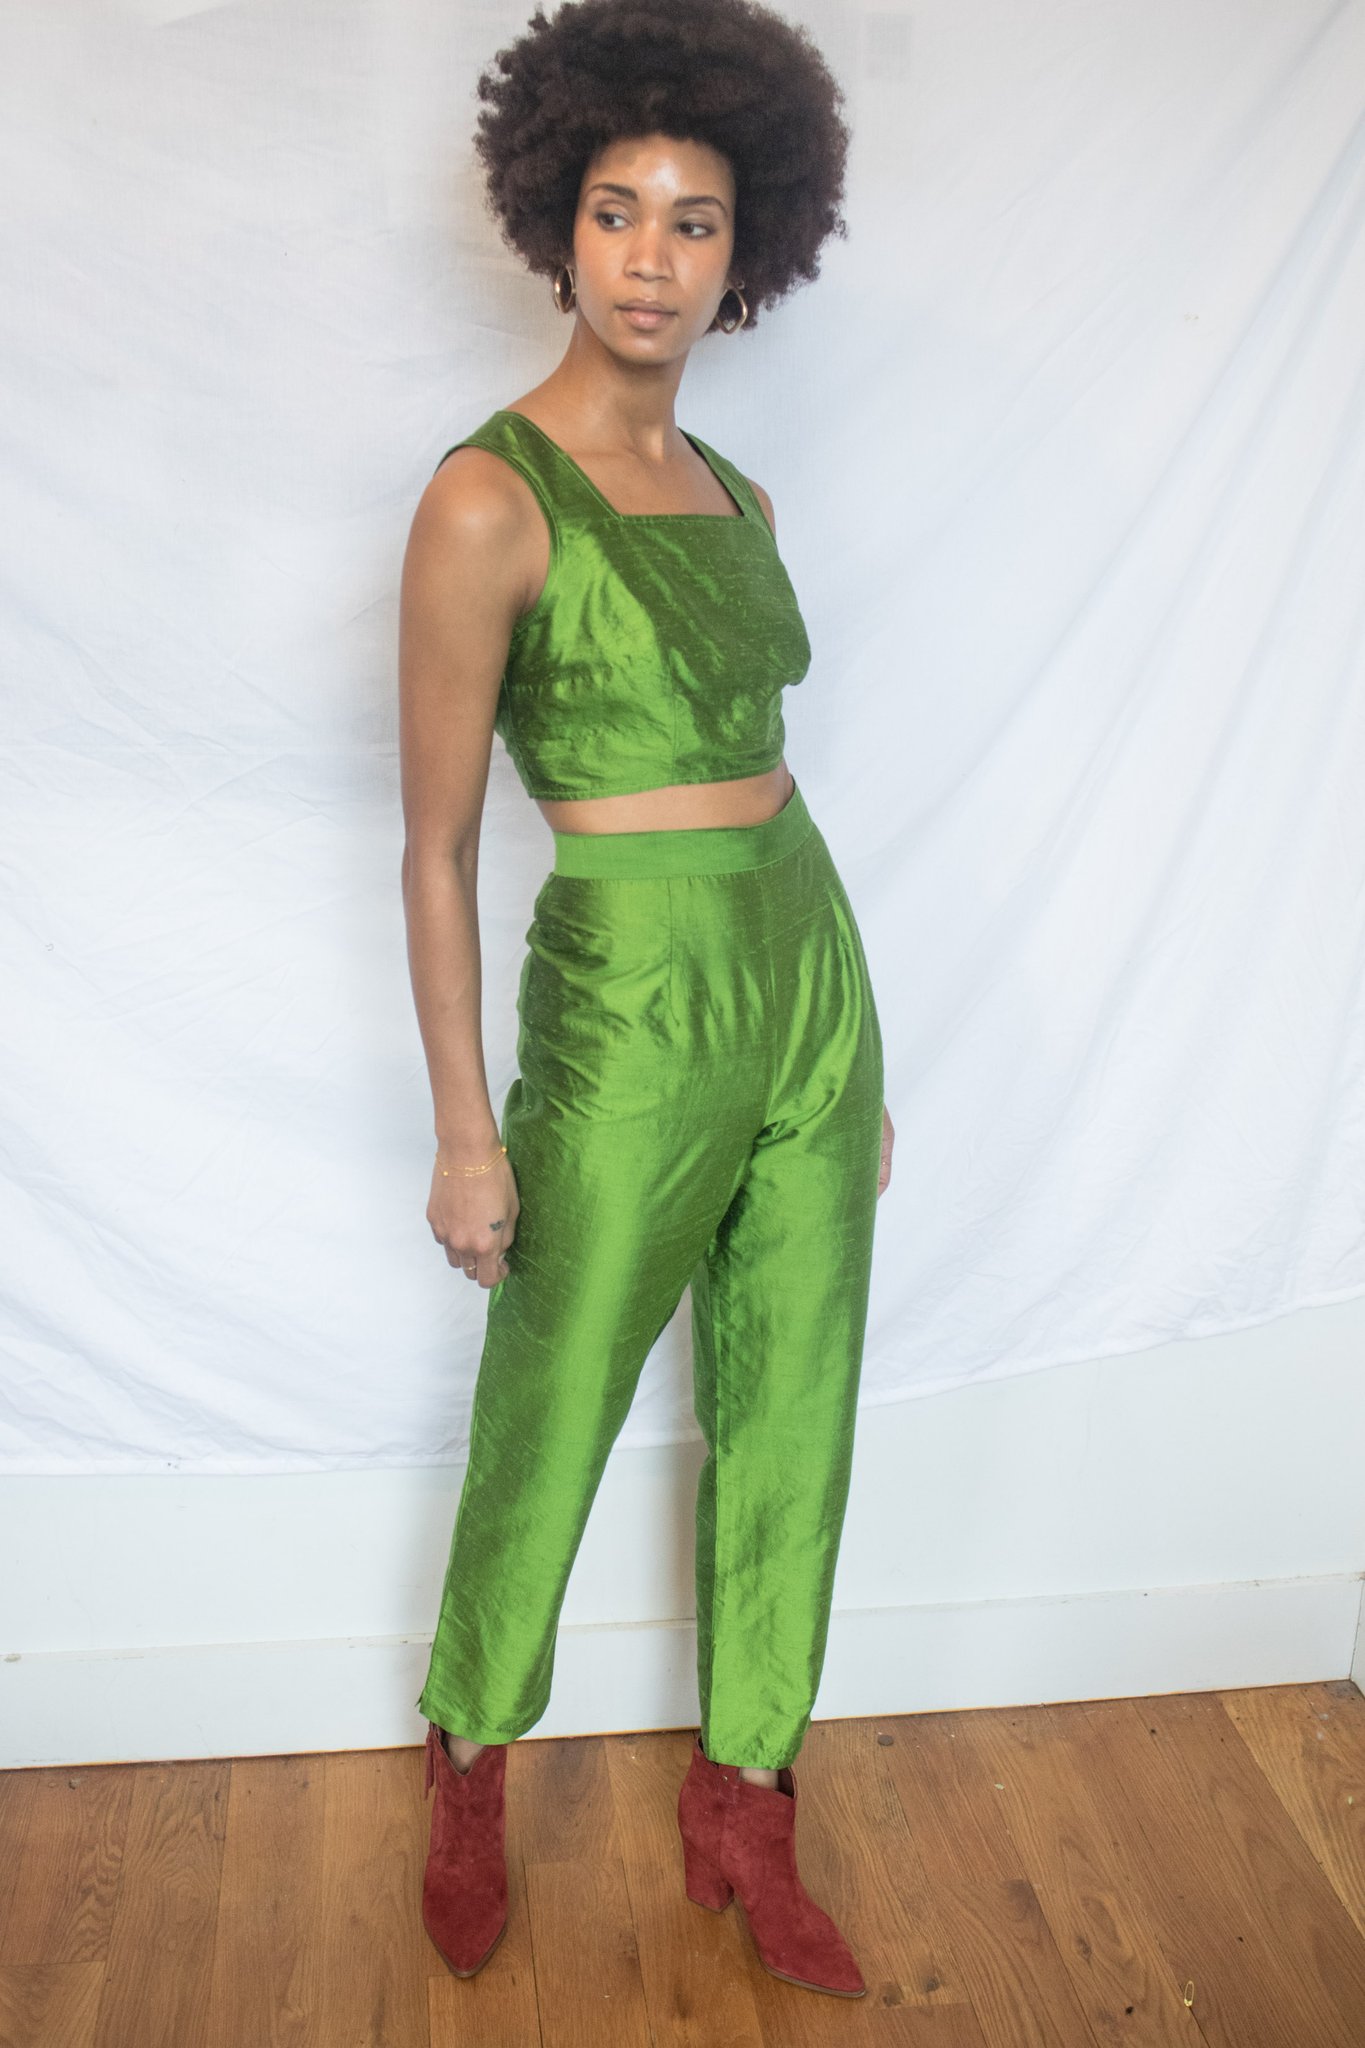 black woman with natural hair wearing a green crop top and matching pants with orange boots